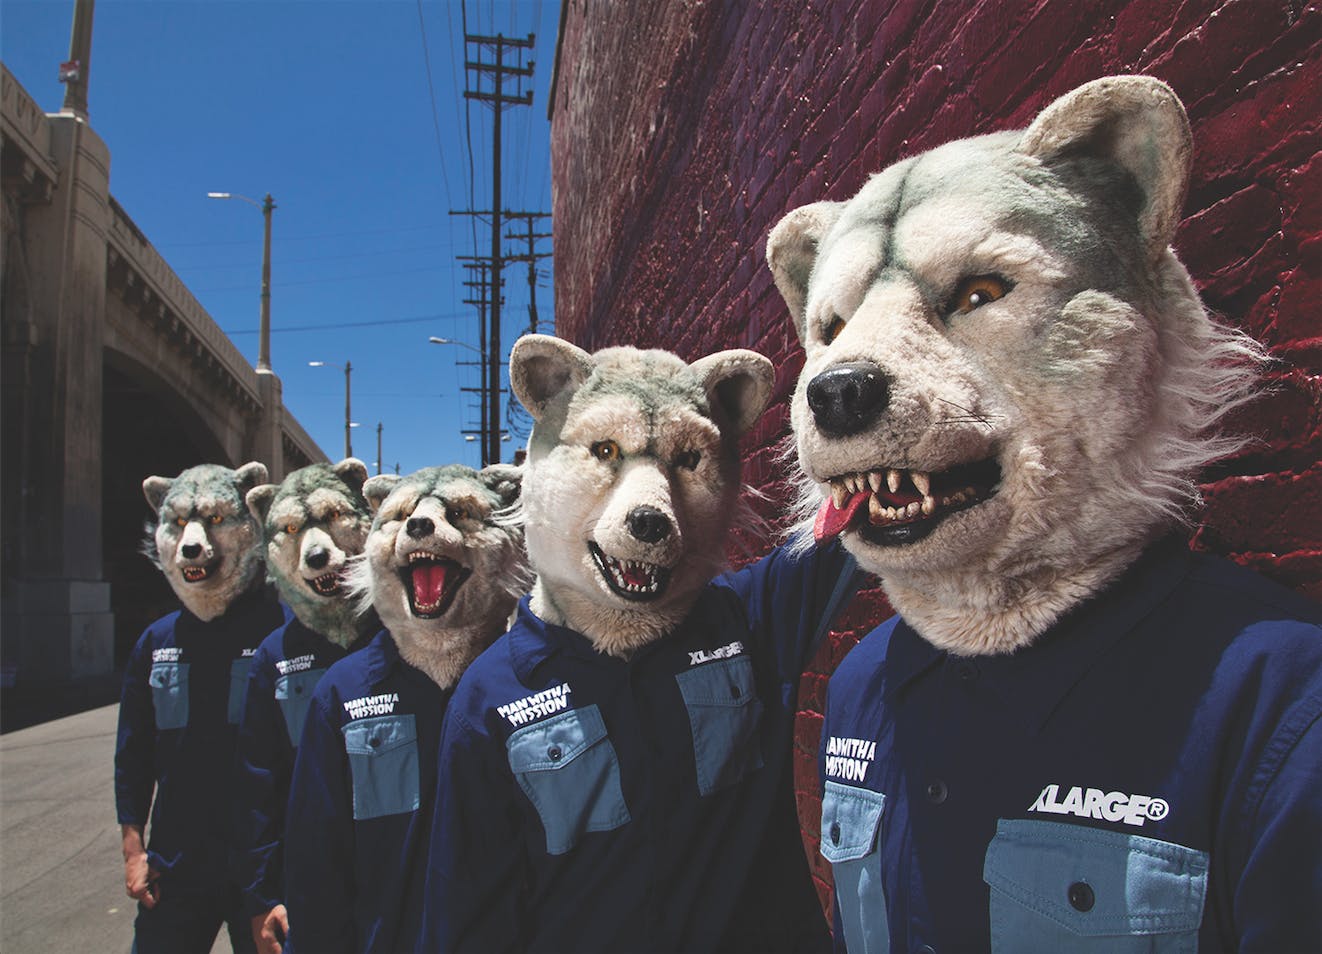 Japanese Superstars Man With A Mission Set Their Sights On Global Domination